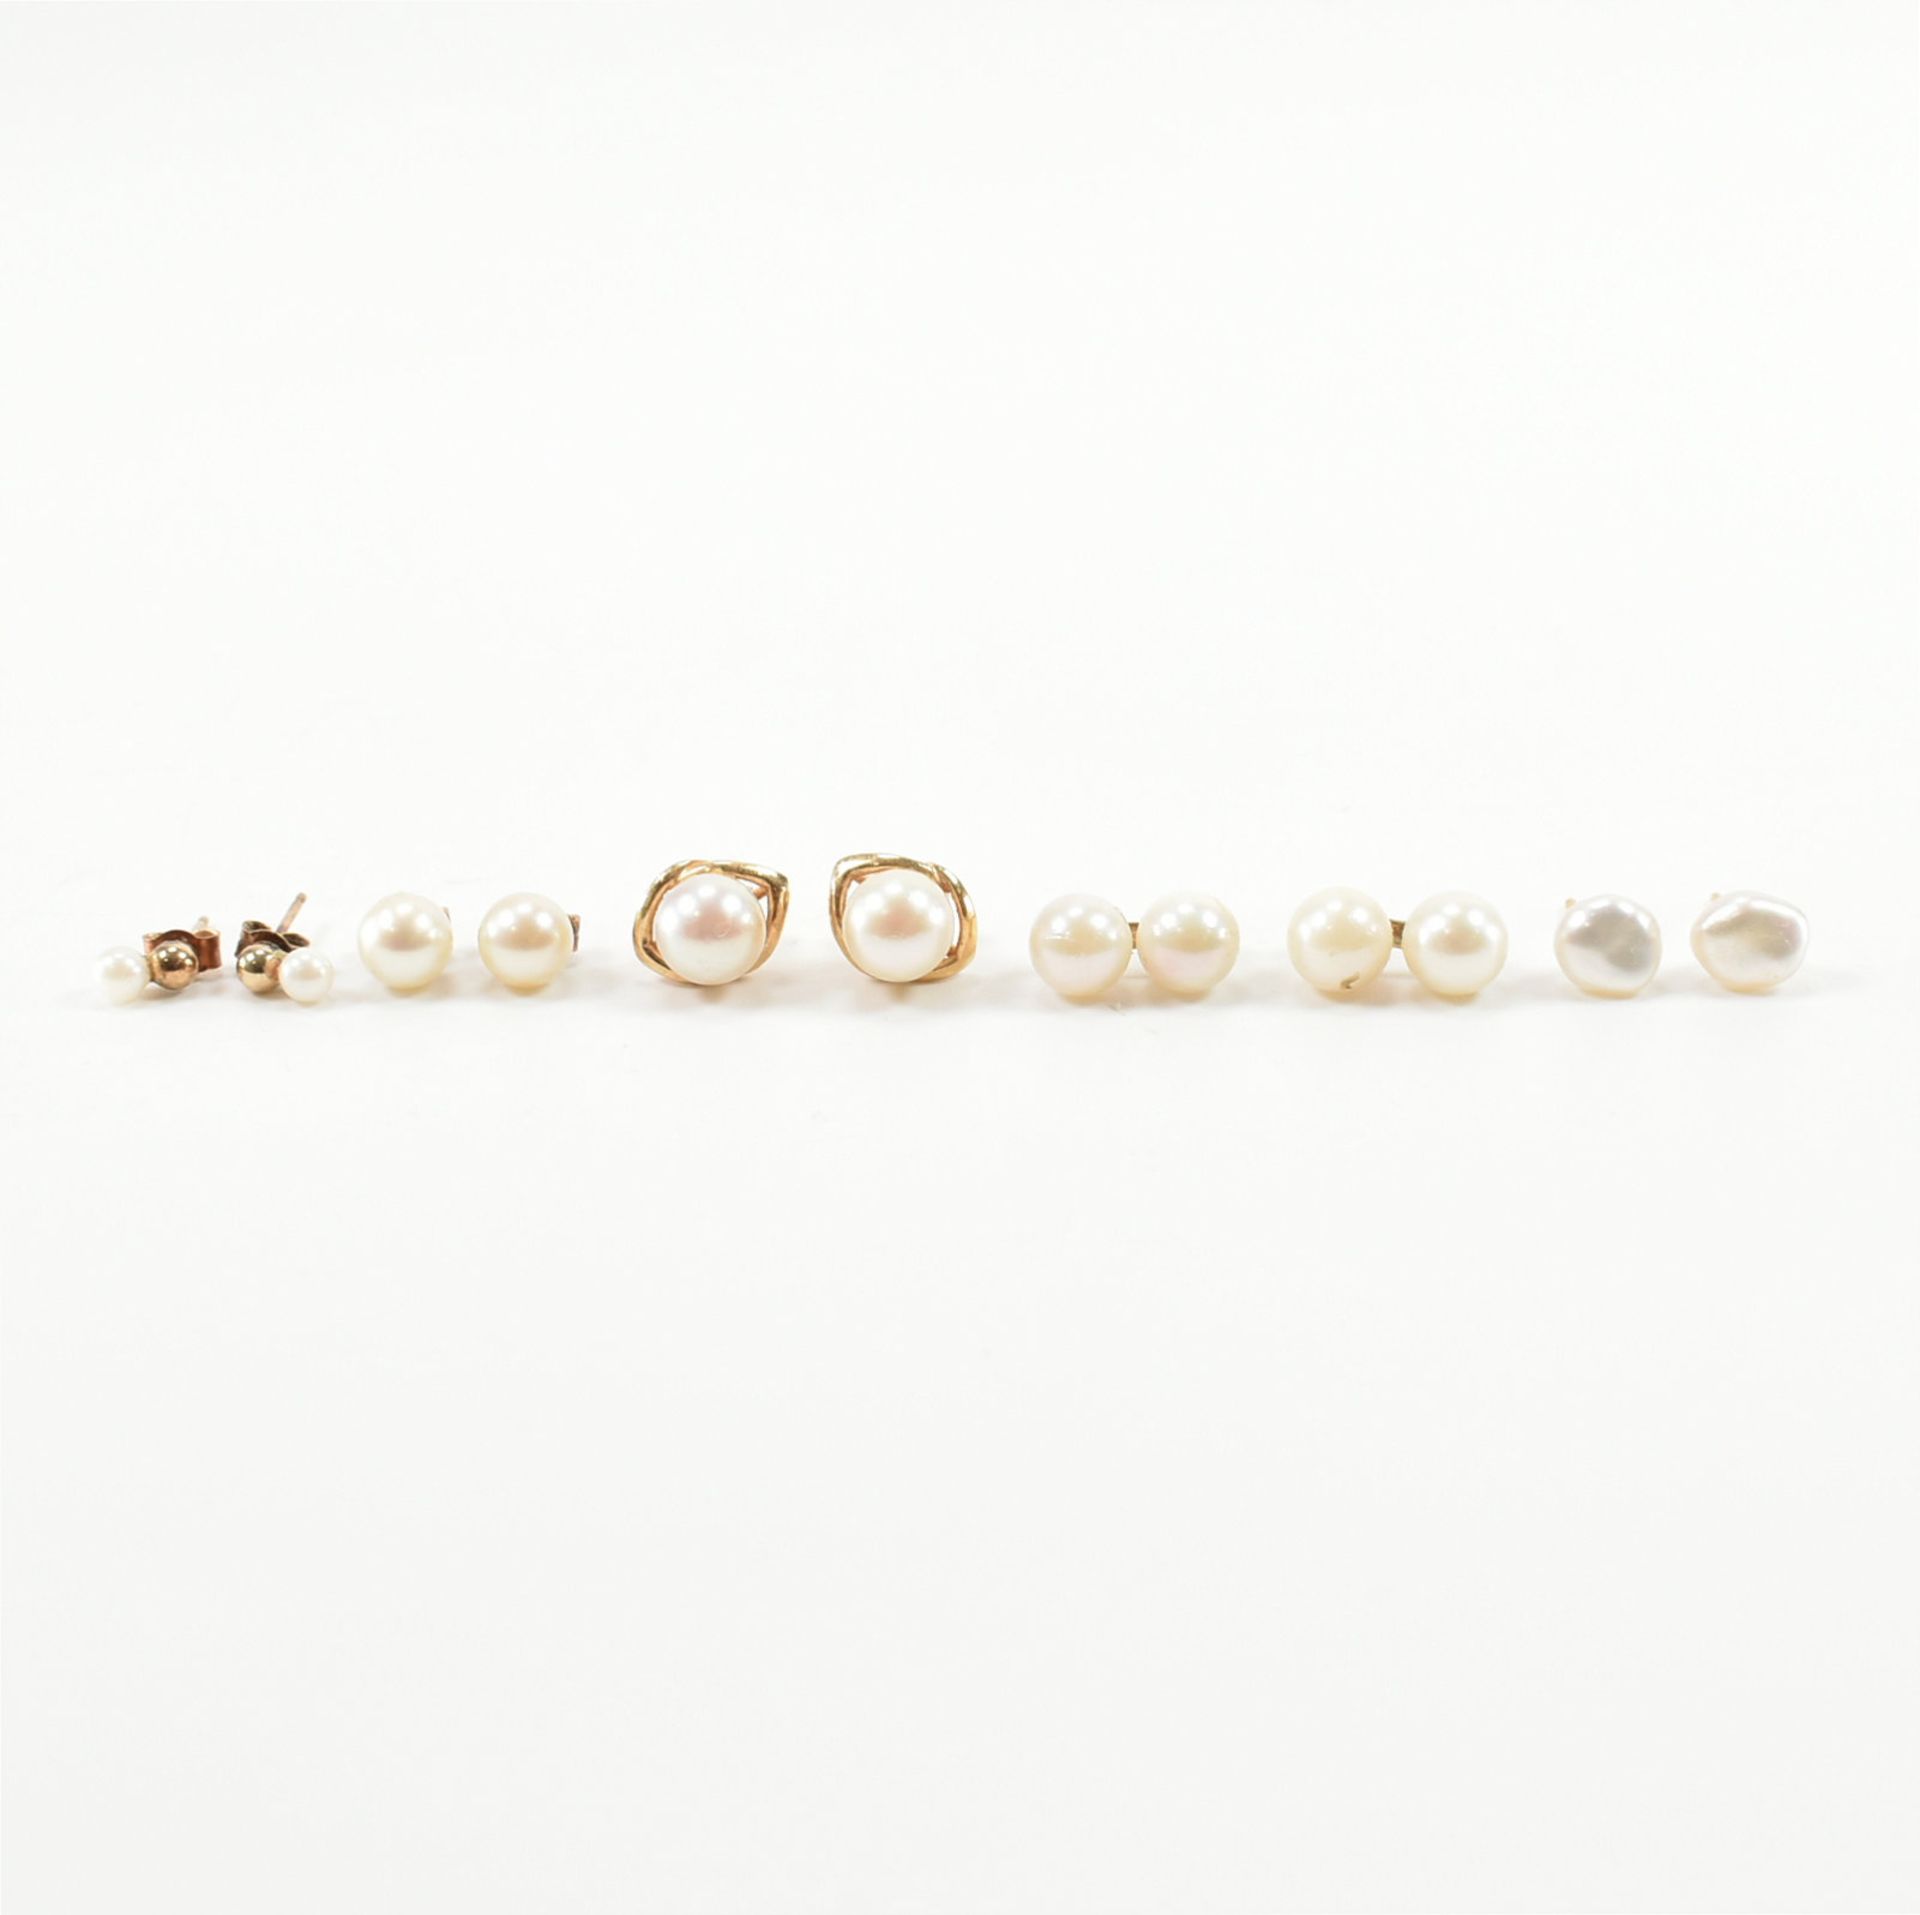 COLLECTION OF ASSORTED GOLD & PEARL STUD EARRINGS - Image 2 of 4